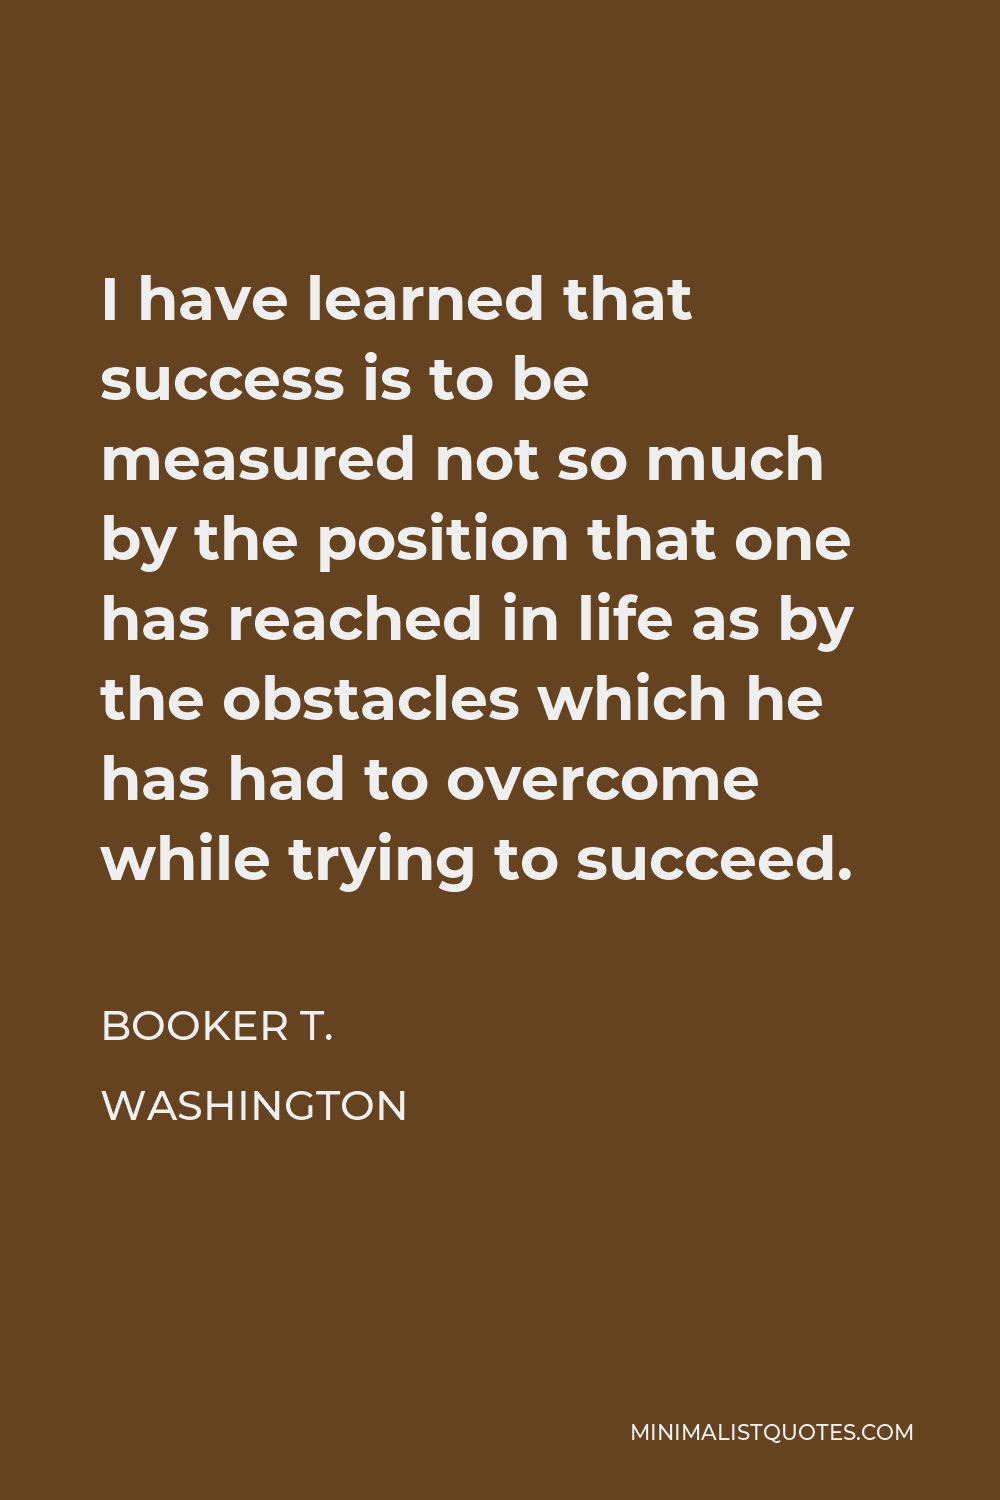 Booker T. Washington Quote - I have learned that success is to be measured not so much by the position that one has reached in life as by the obstacles which he has had to overcome while trying to succeed.